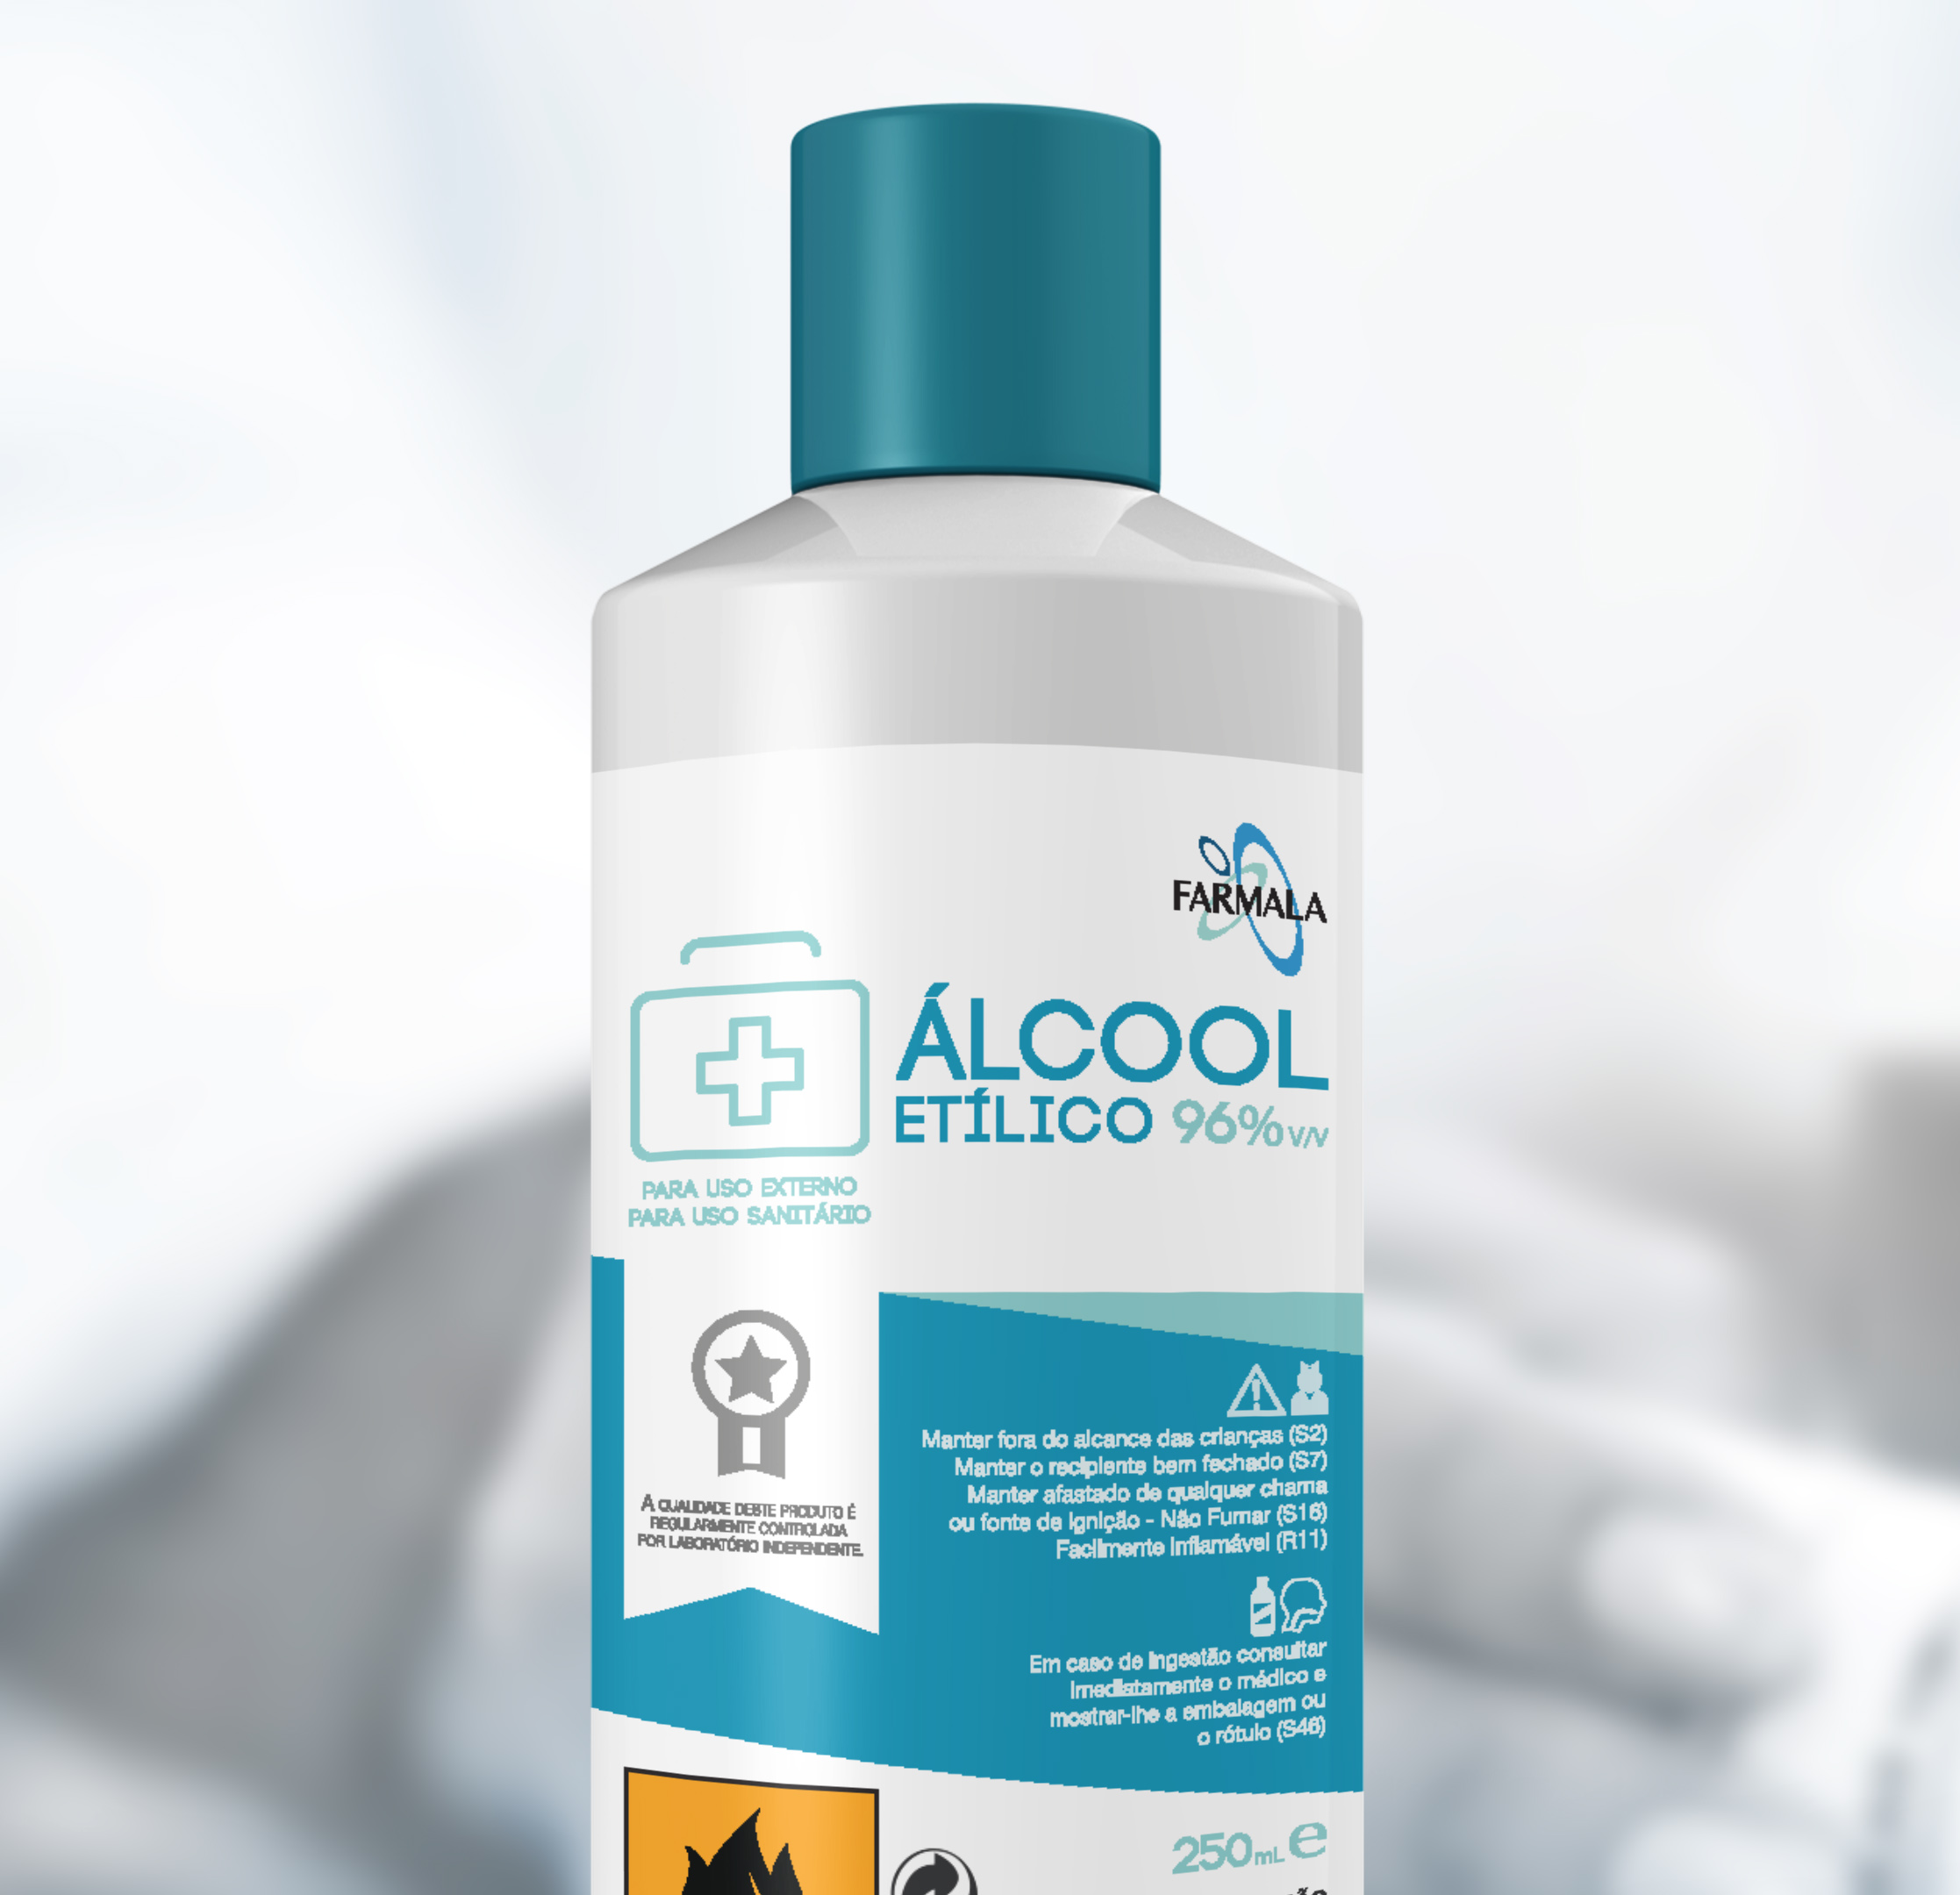 packaging and branding of a rubbing alcohol product label. close up